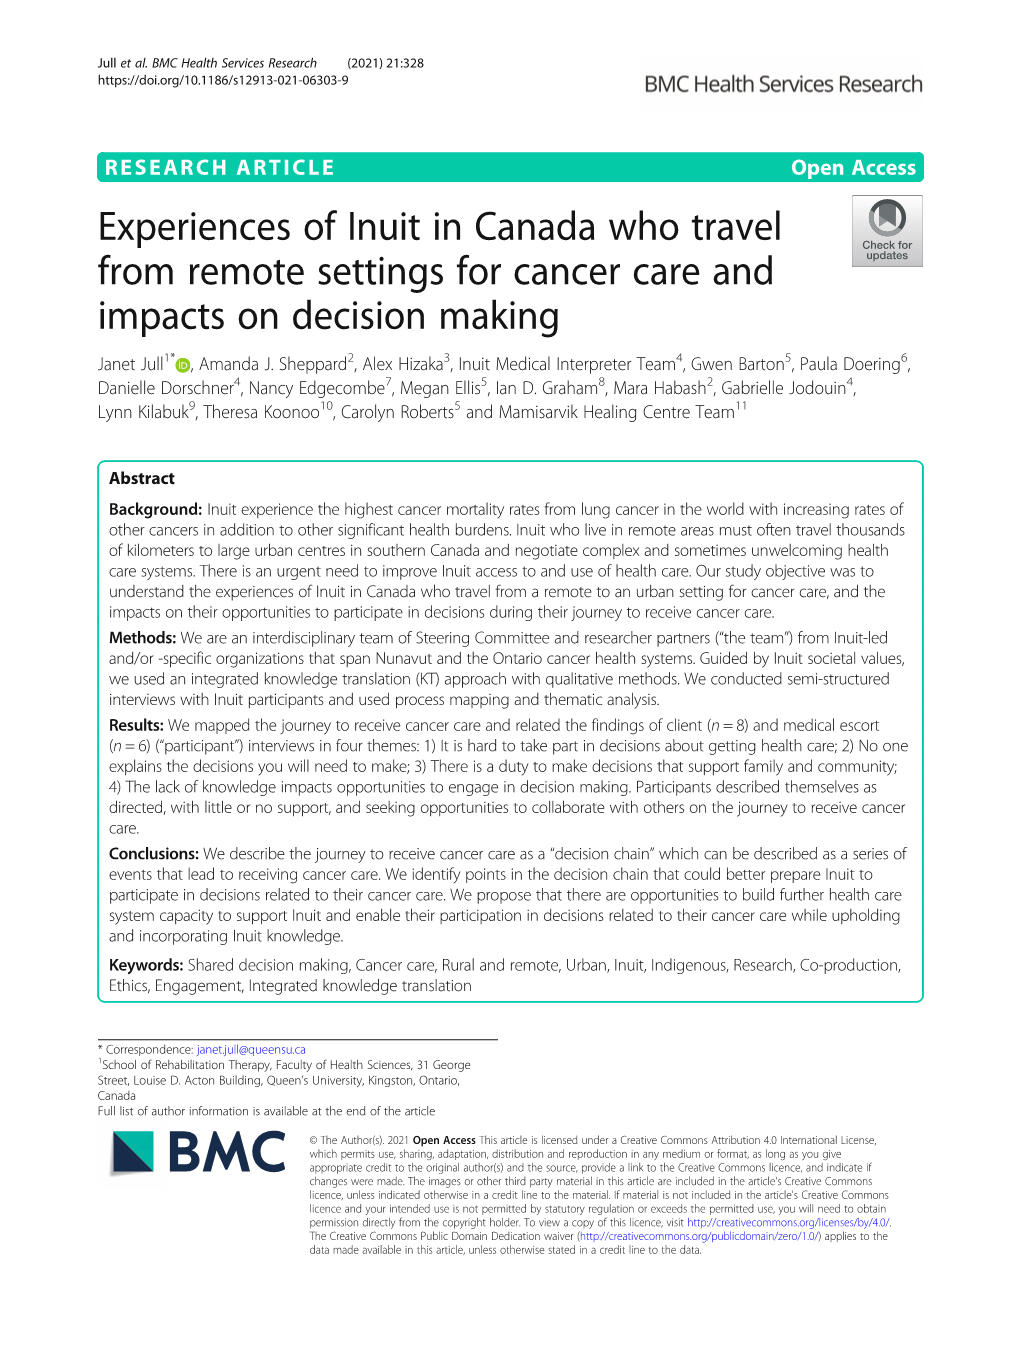 Experiences of Inuit in Canada Who Travel from Remote Settings for Cancer Care and Impacts on Decision Making Janet Jull1* , Amanda J